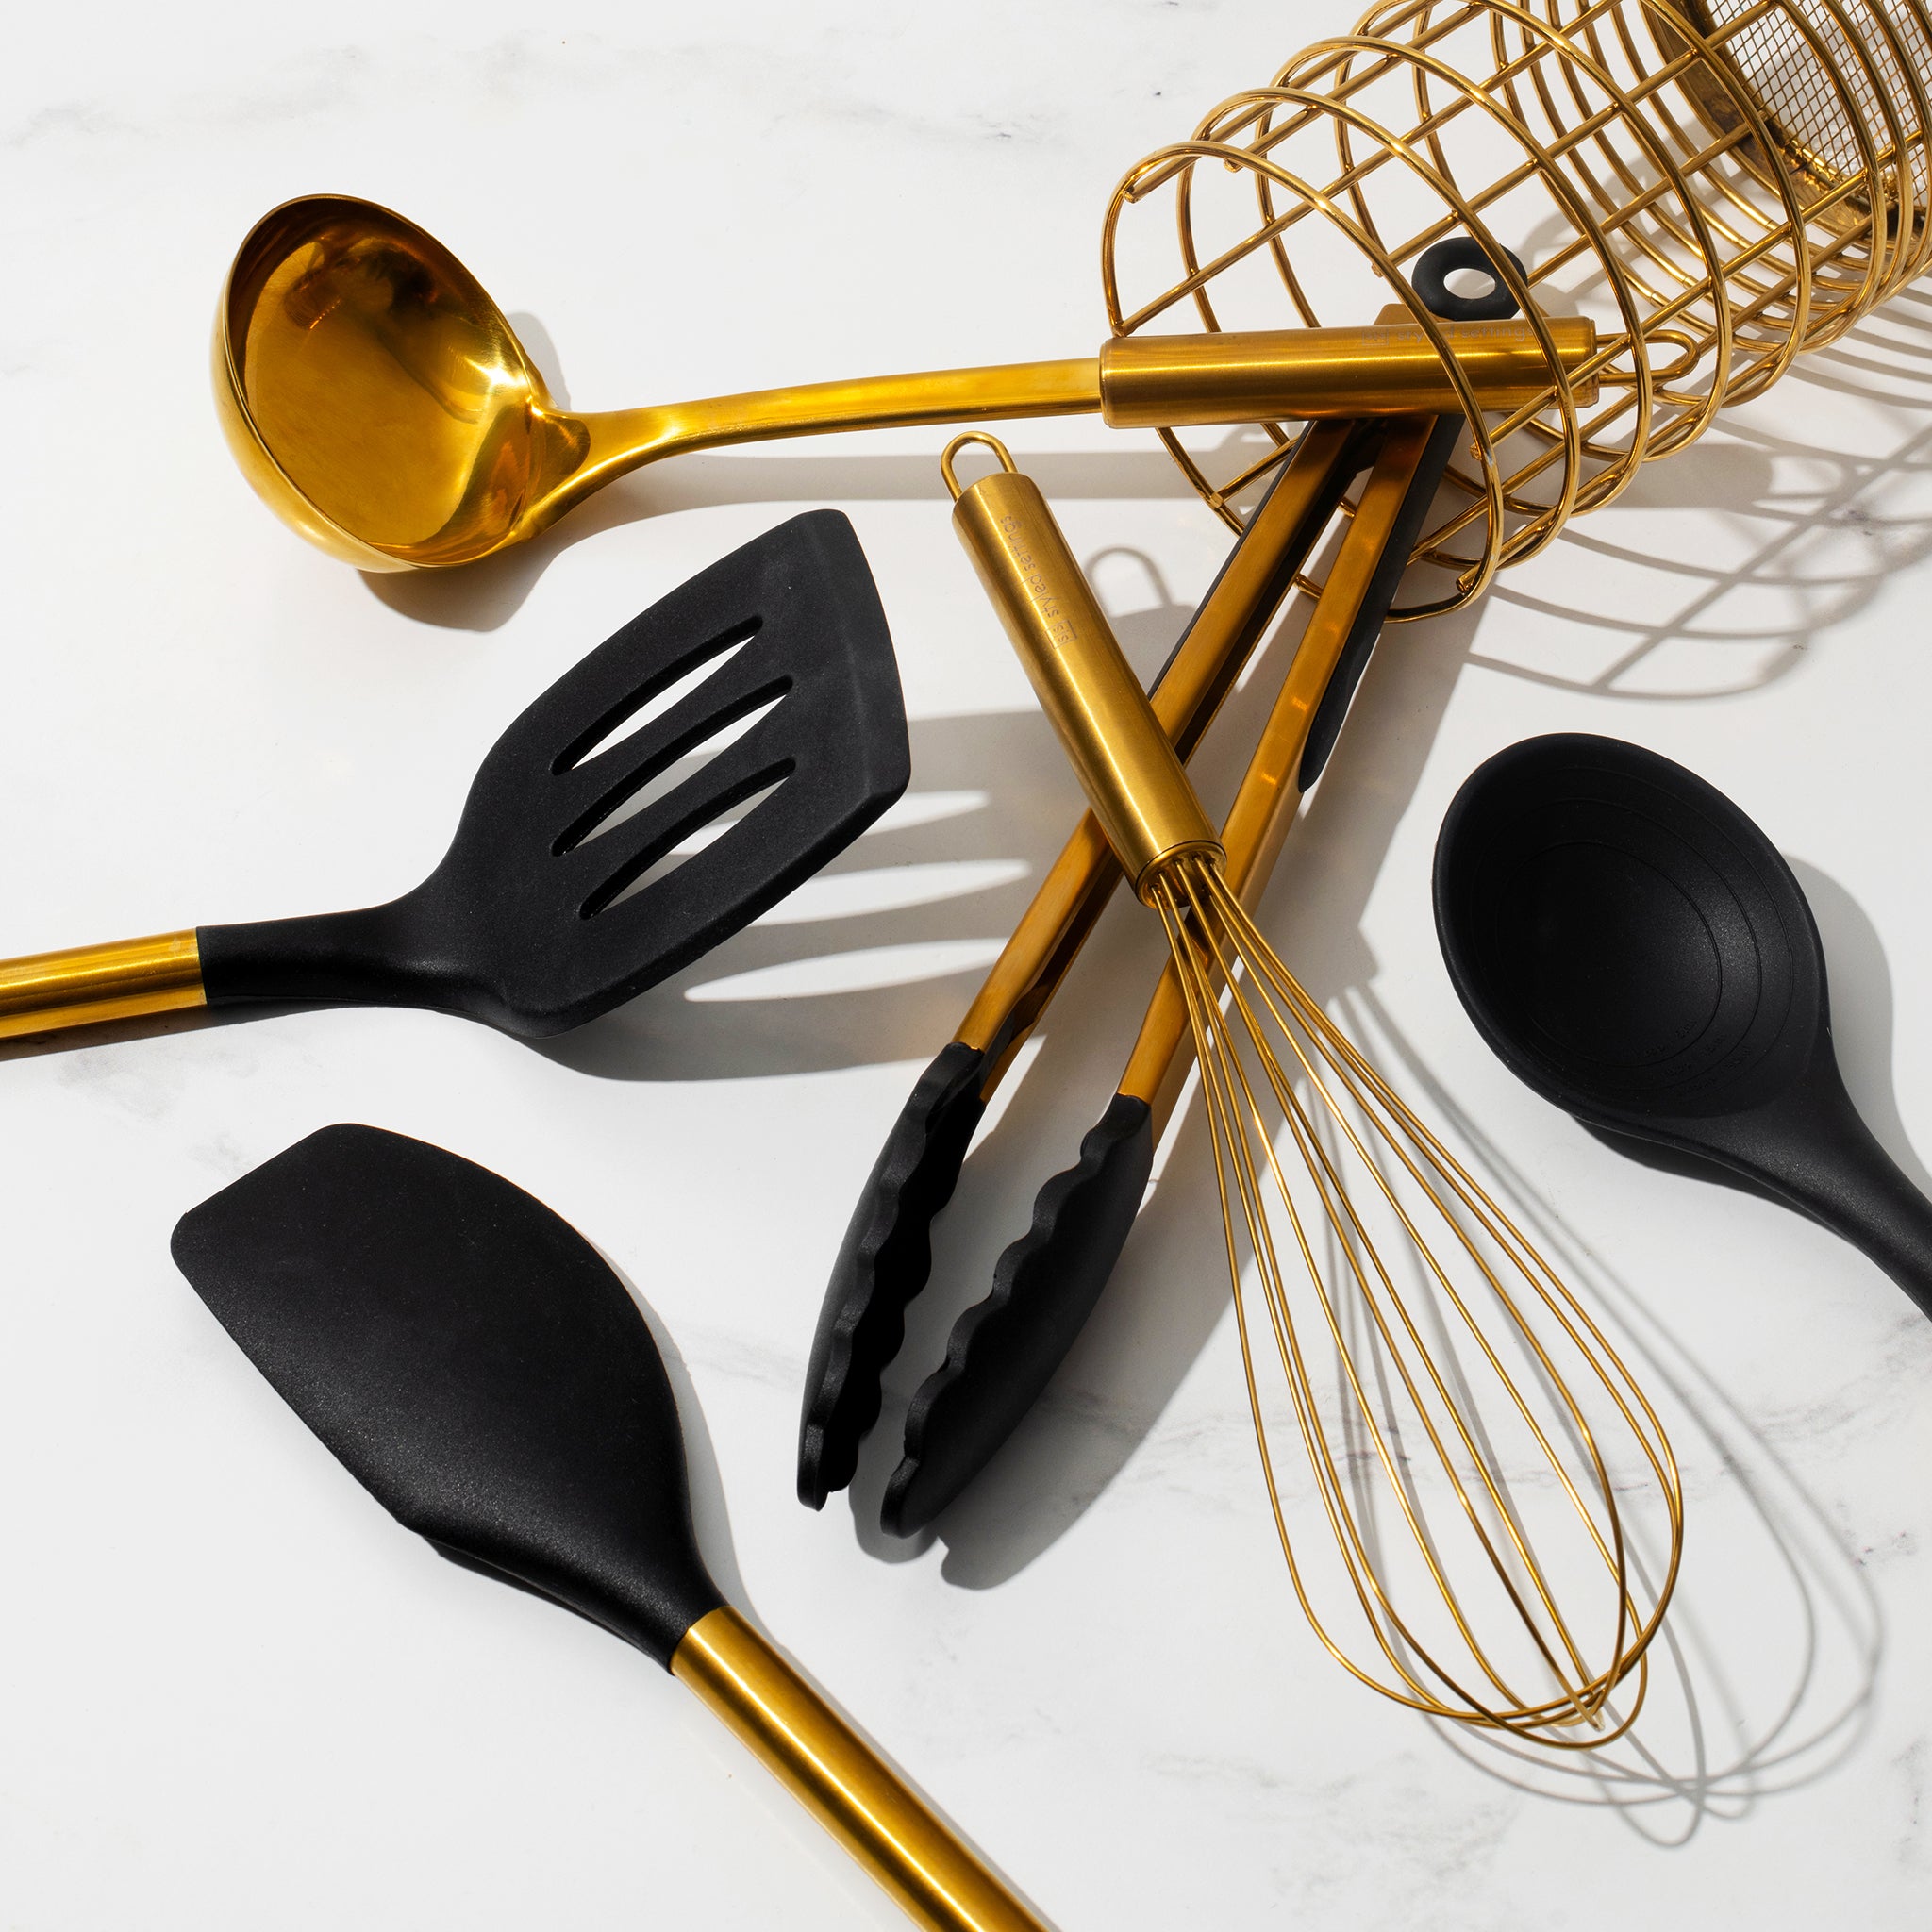 Black and Gold Kitchen Utensils Set with Holder - Styled Settings